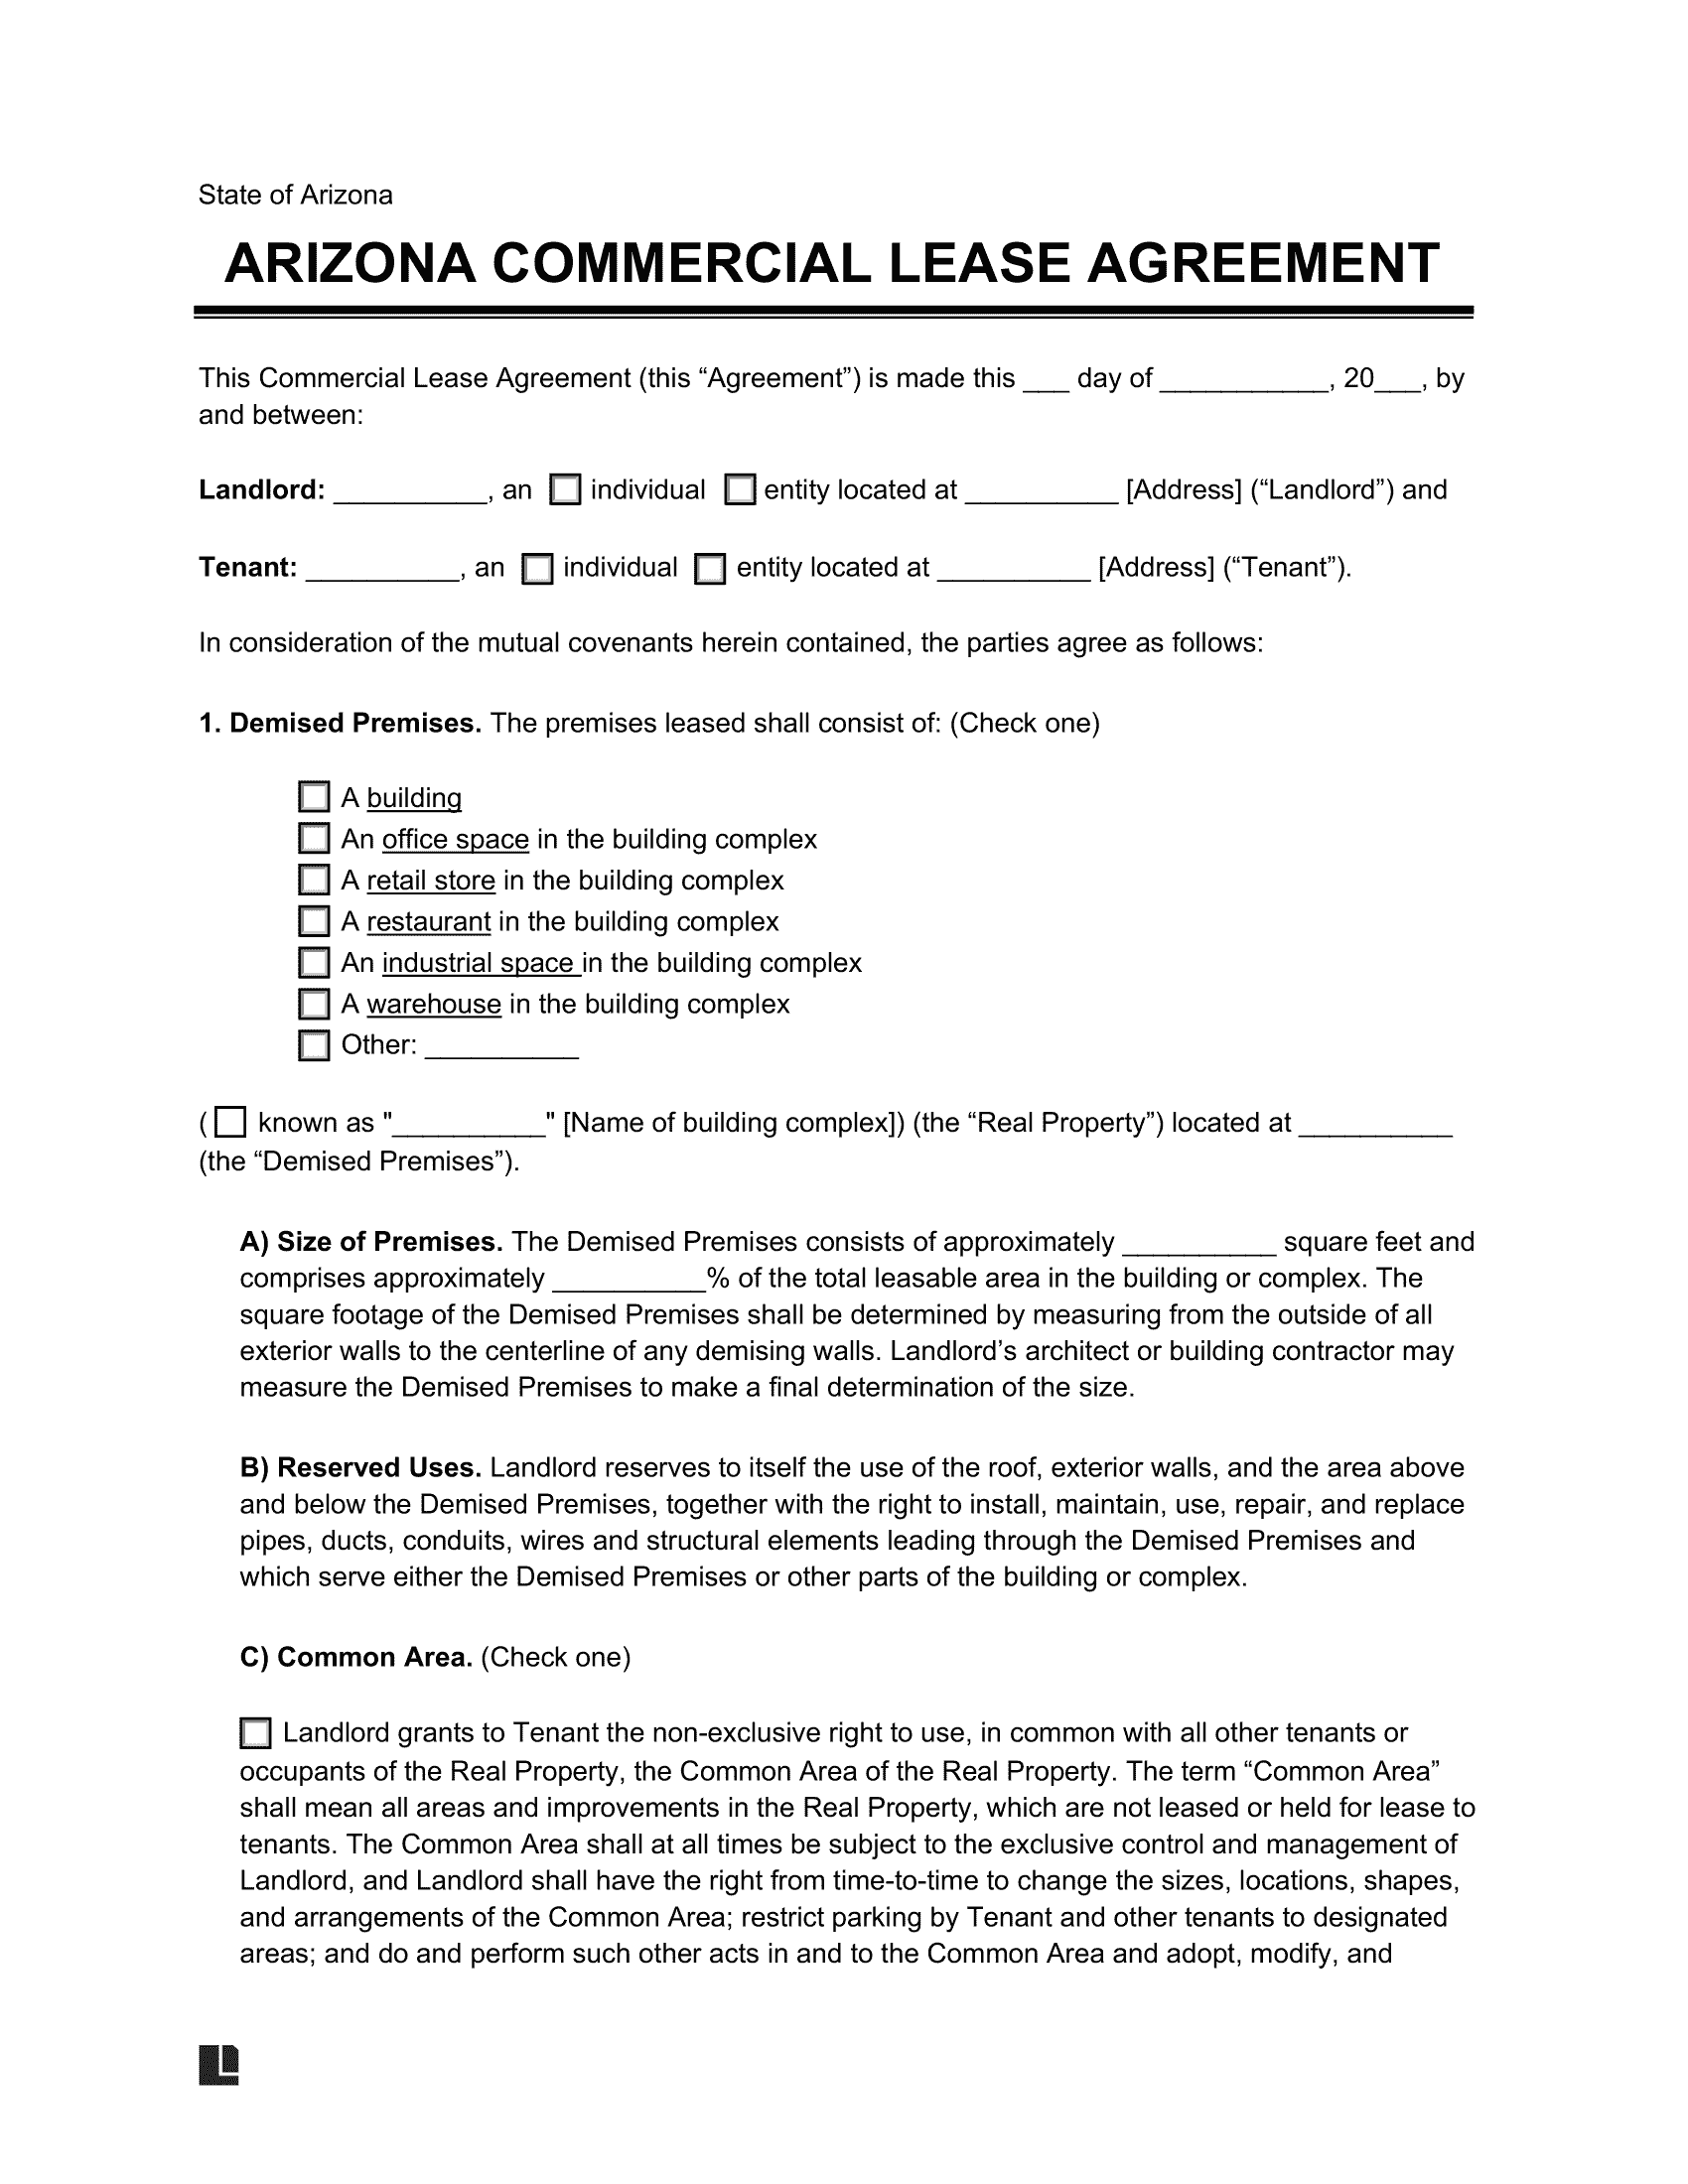 Arizona Commercial Lease Agreement